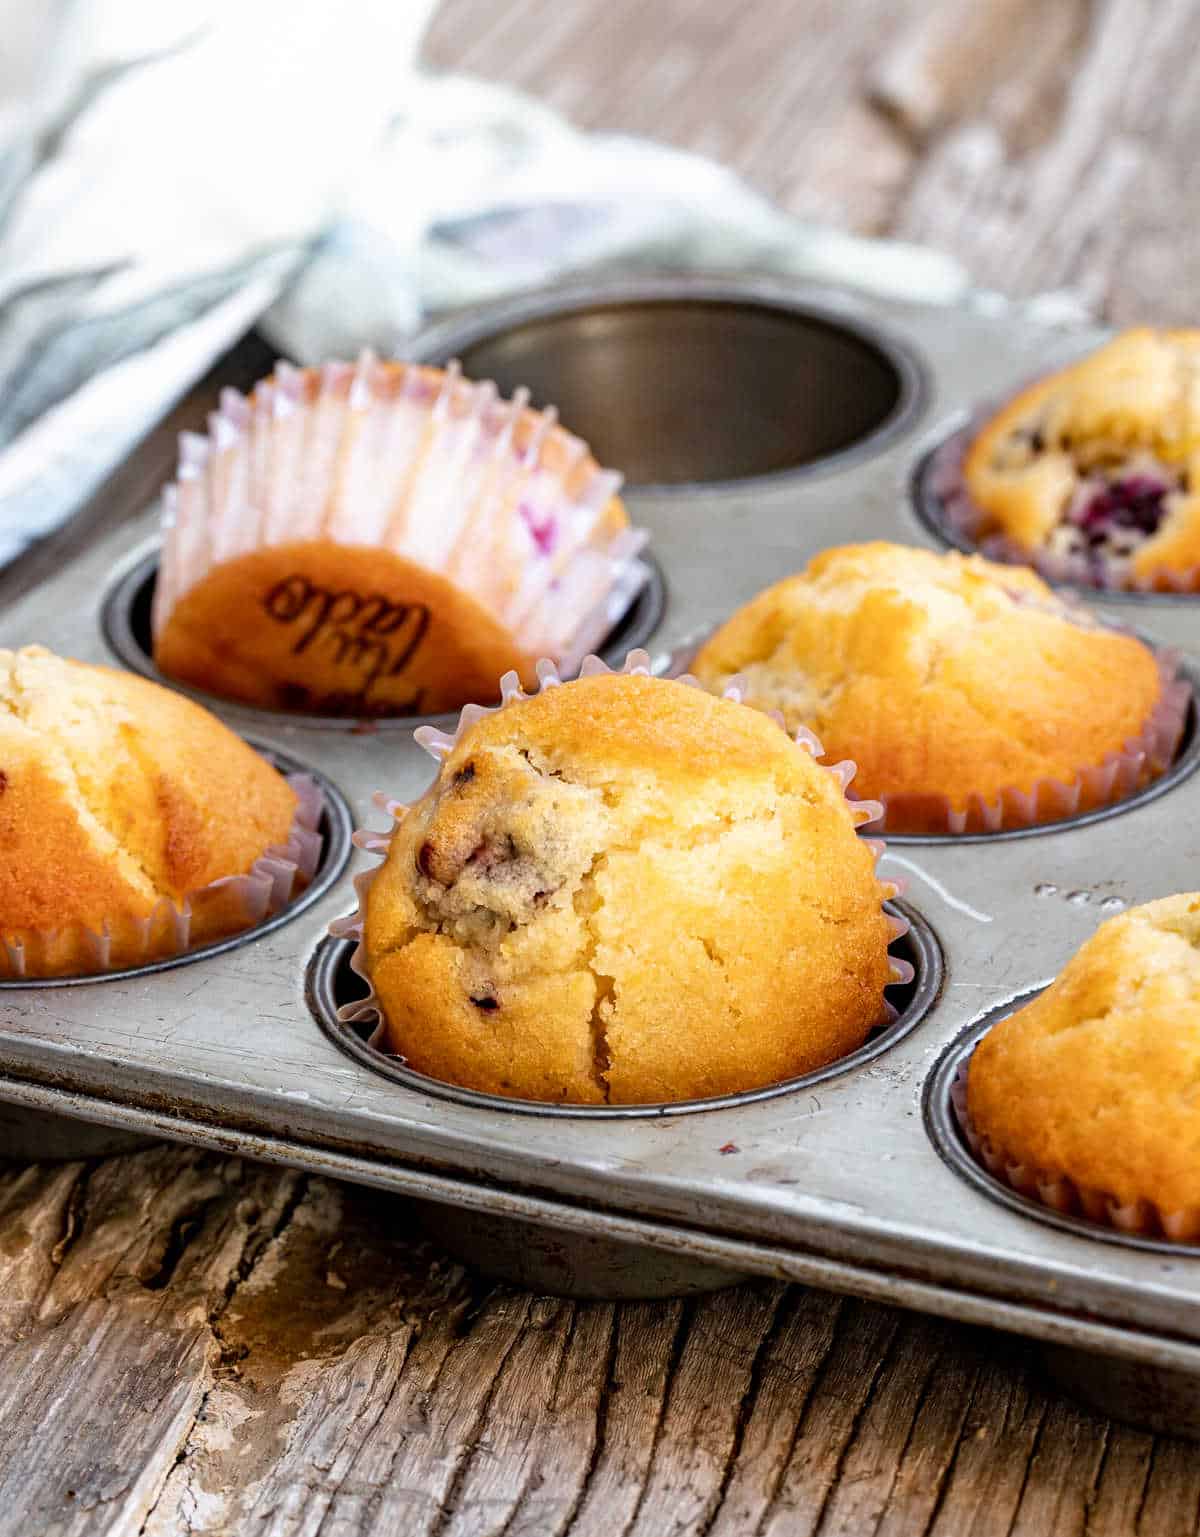 Metal muffin tin with baked blackberry muffins, grey wooden surface, kitchen towel in background.